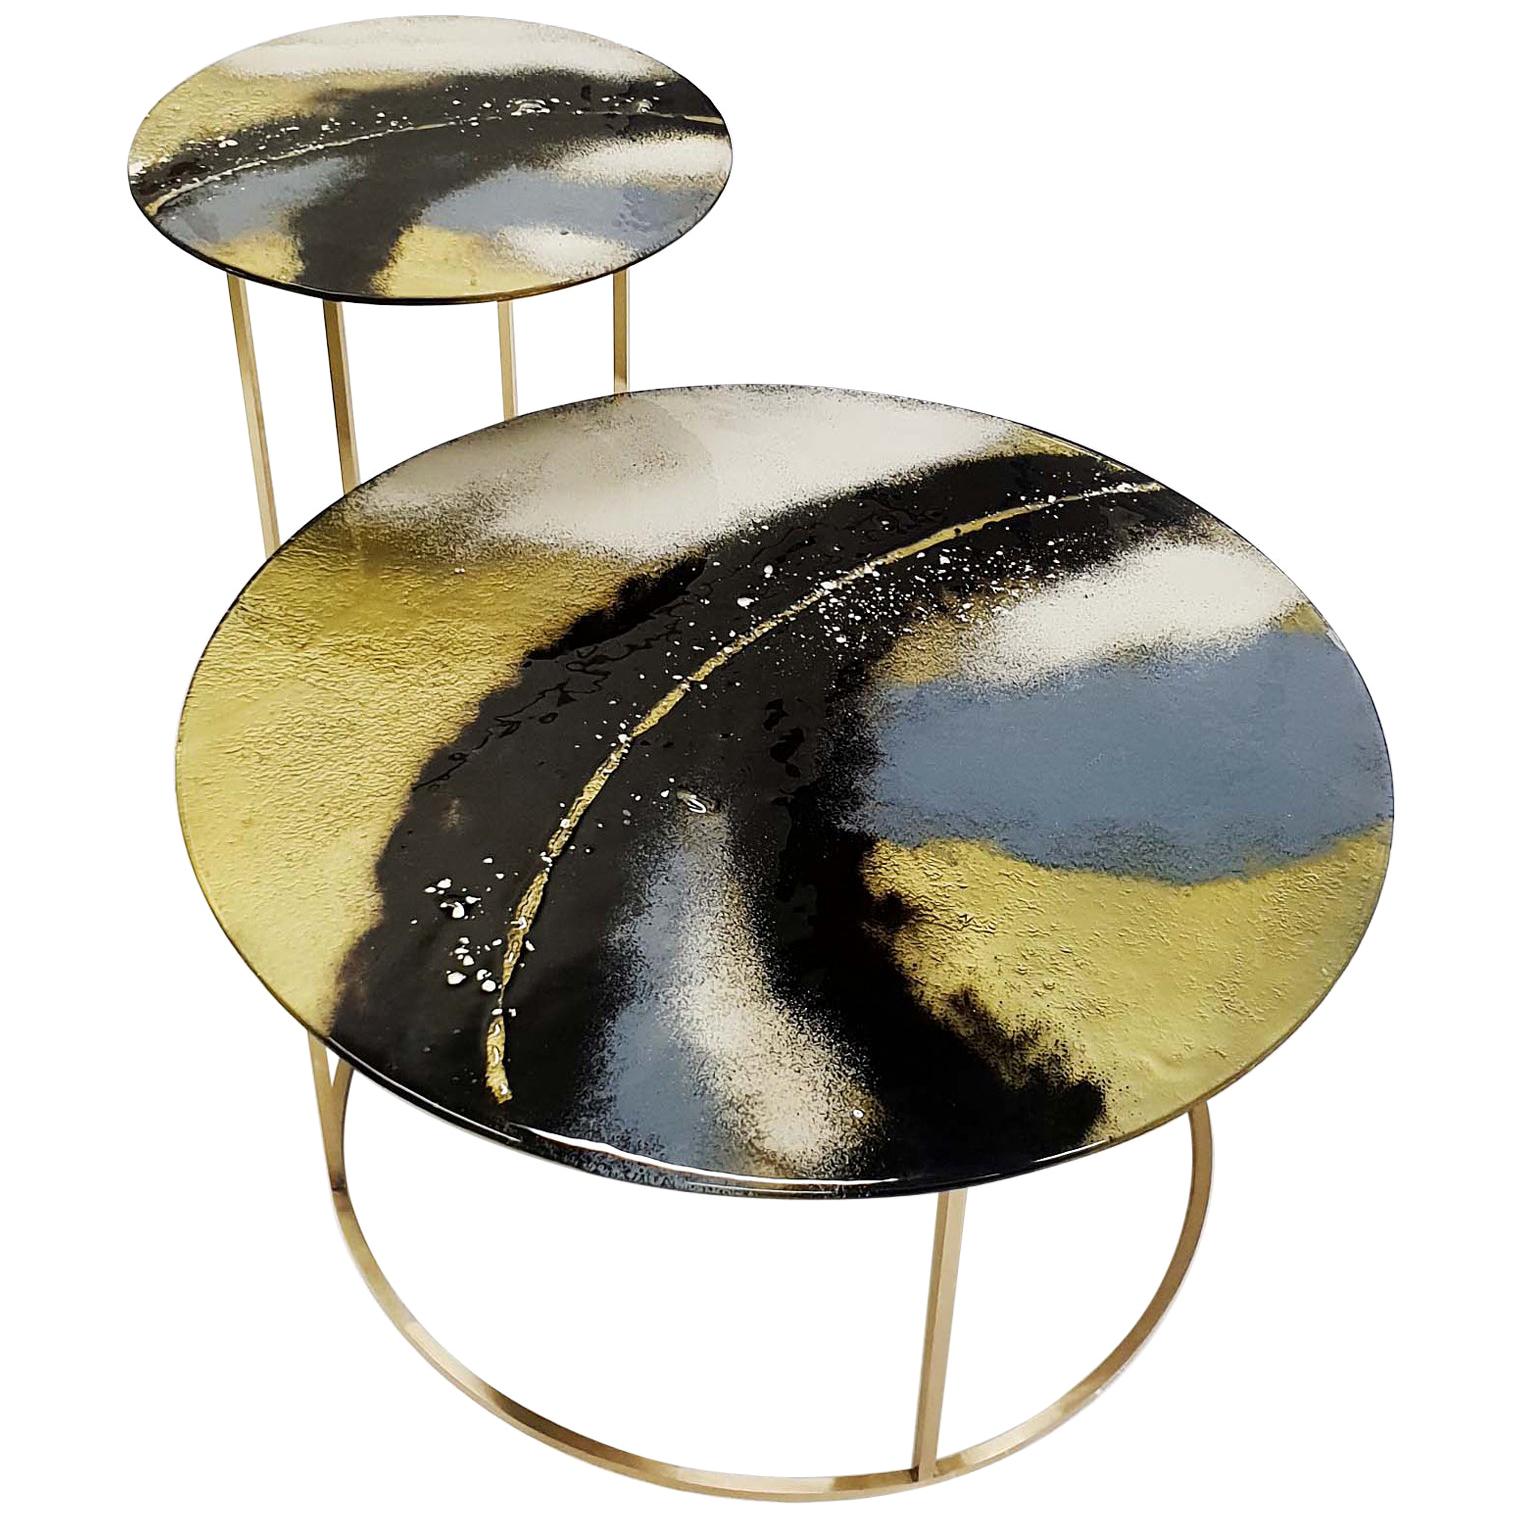 Modern Contemporary Round Coffee Tables Murano Glass in Gold, Black and Grey